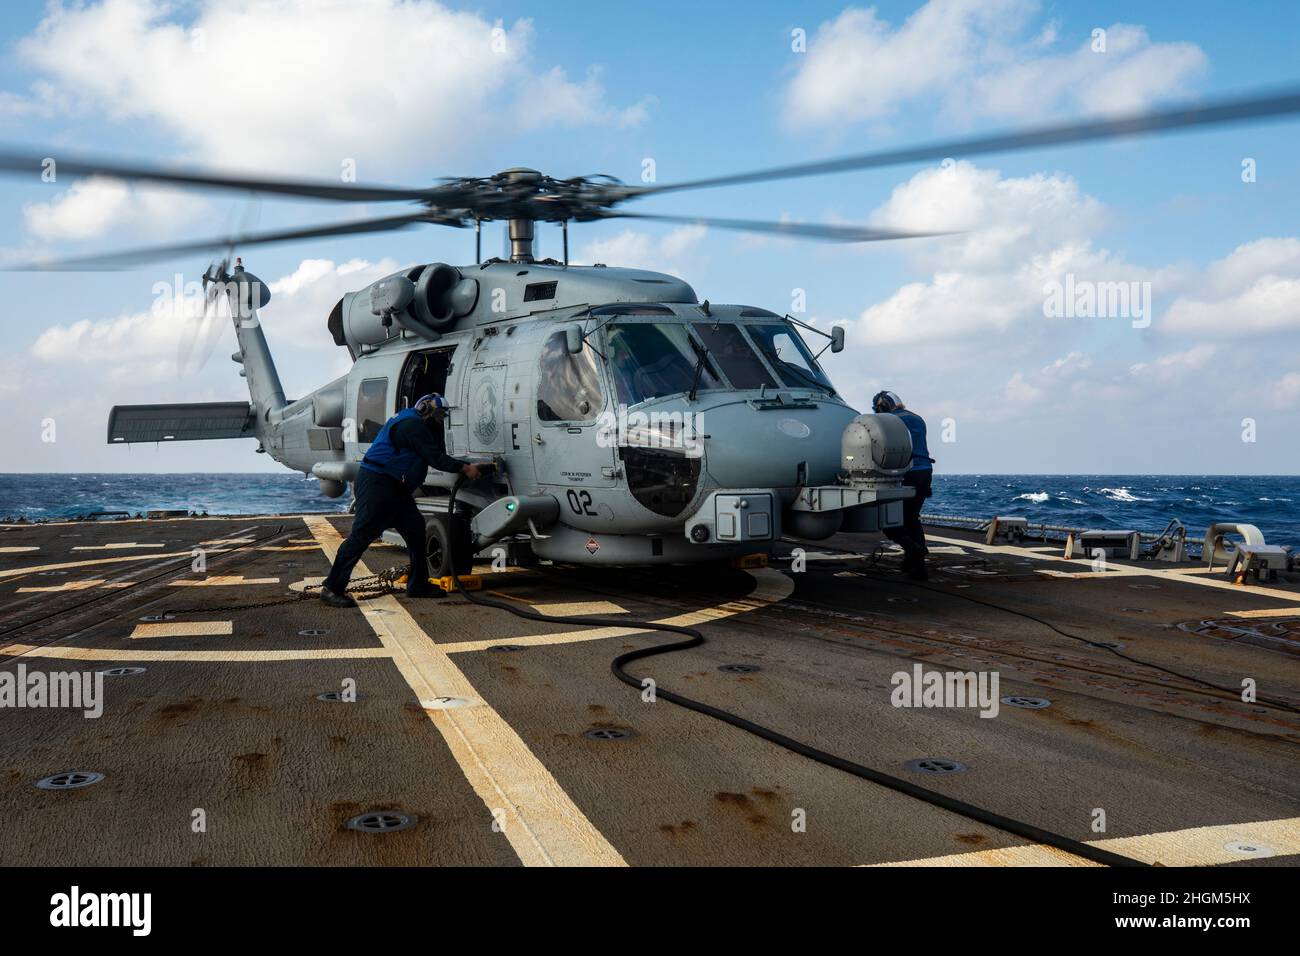 SOUTH CHINA SEA (Jan. 19, 2022) Sailors ready an MH-60R helicopter for take-off during flight operations aboard Arleigh Burke-class guided-missile destroyer USS Ralph Johnson (DDG 114). Ralph Johnson is assigned to Task Force 71/Destroyer Squadron (DESRON) 15, the Navy’s largest forward-deployed DESRON and the U.S. 7th fleet’s principal surface force. (U.S. Navy photo by Mass Communication Specialist 2nd Class Samantha Oblander) Stock Photo